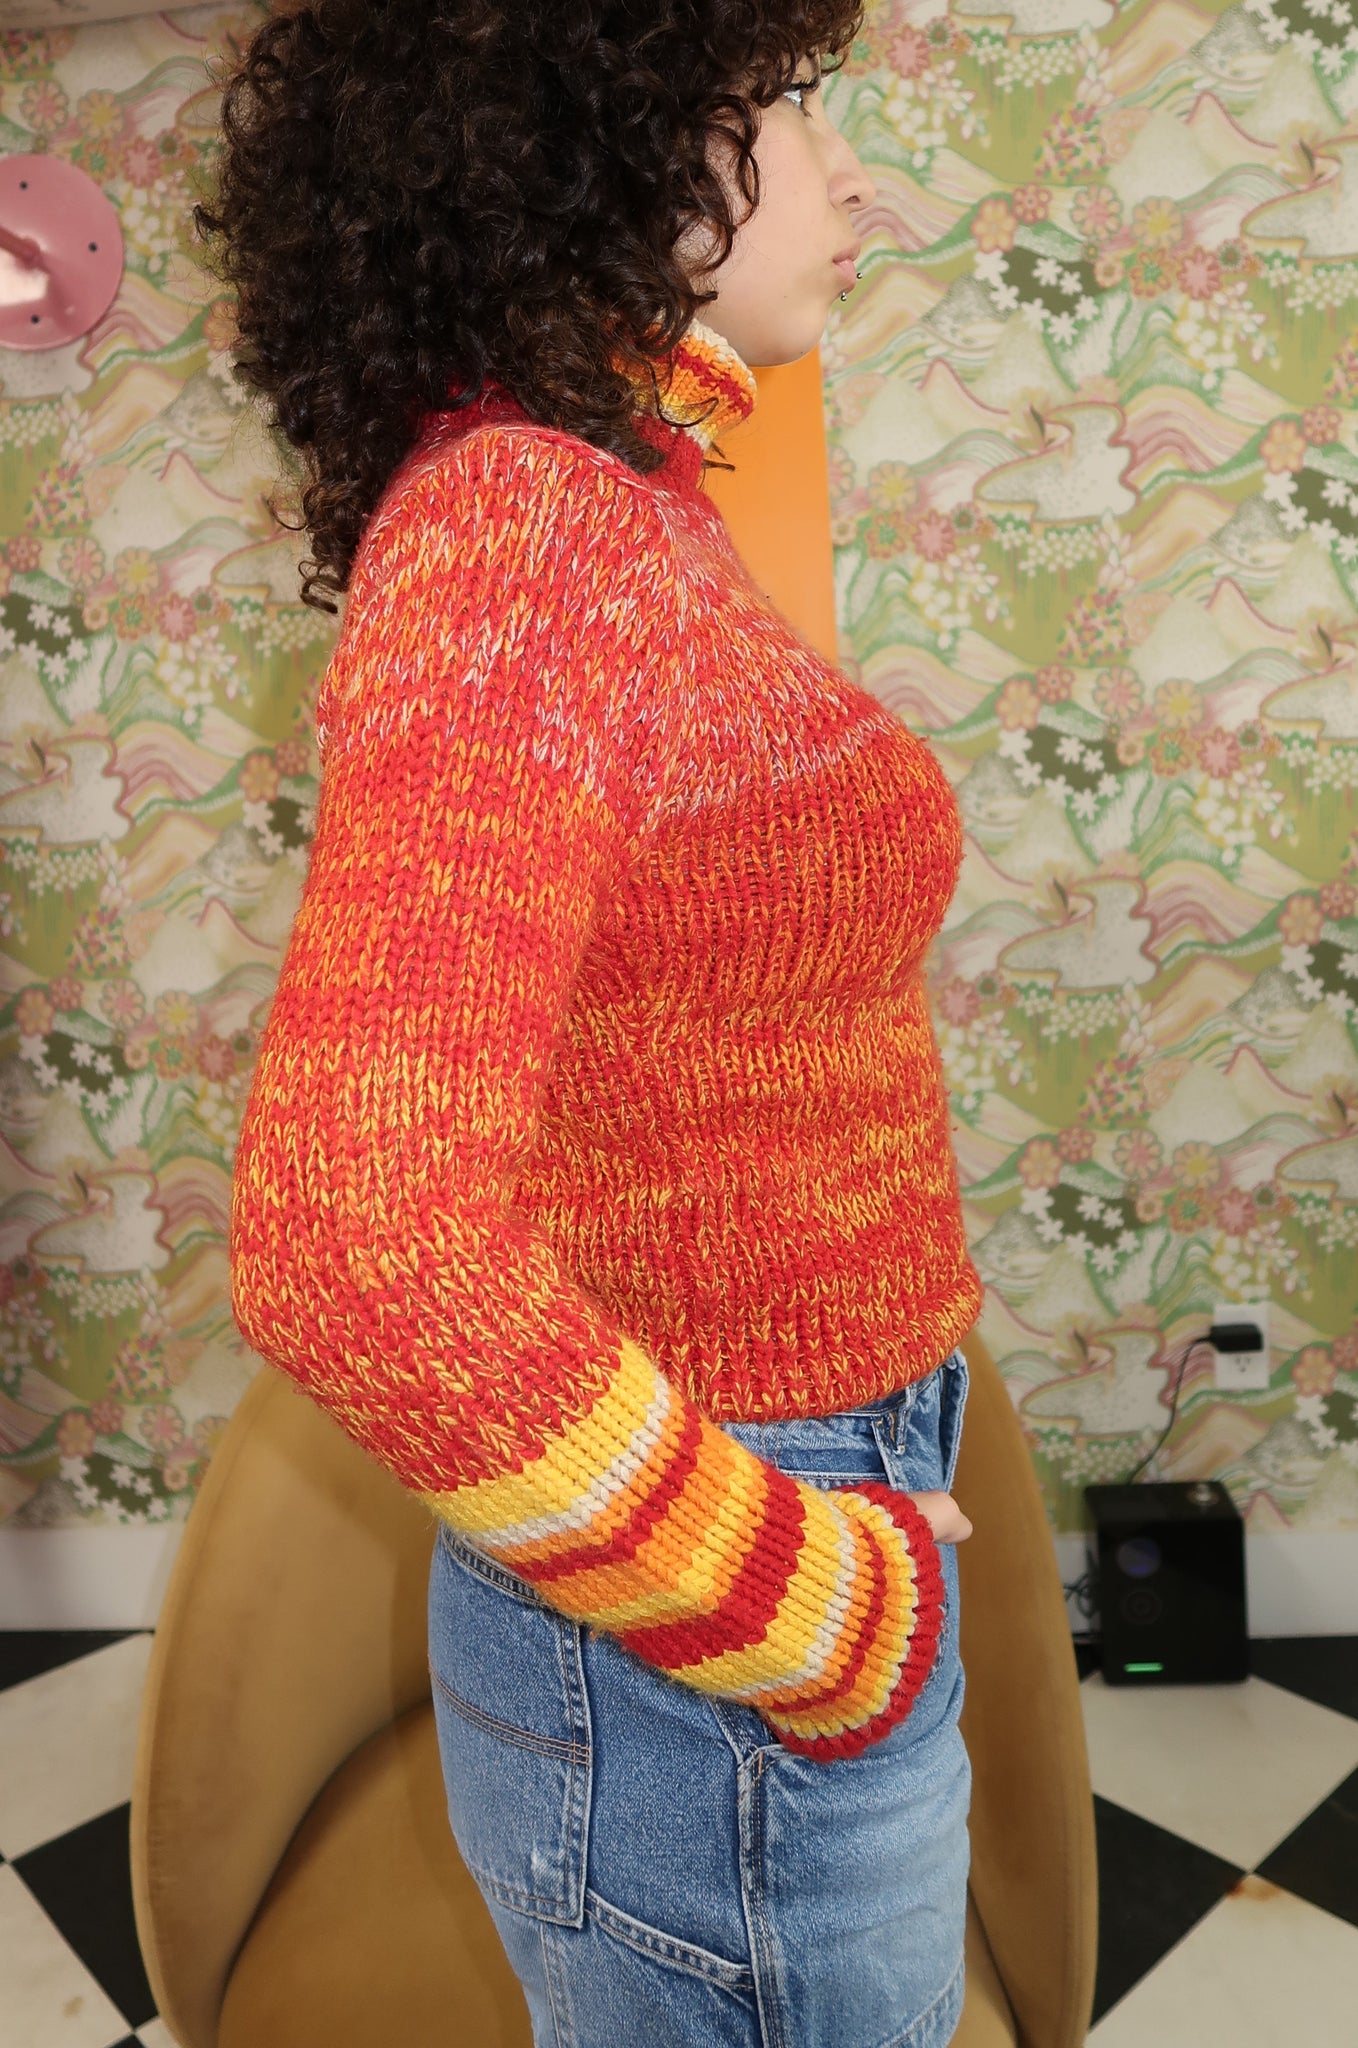 Knitted Turtle Neck Sweater